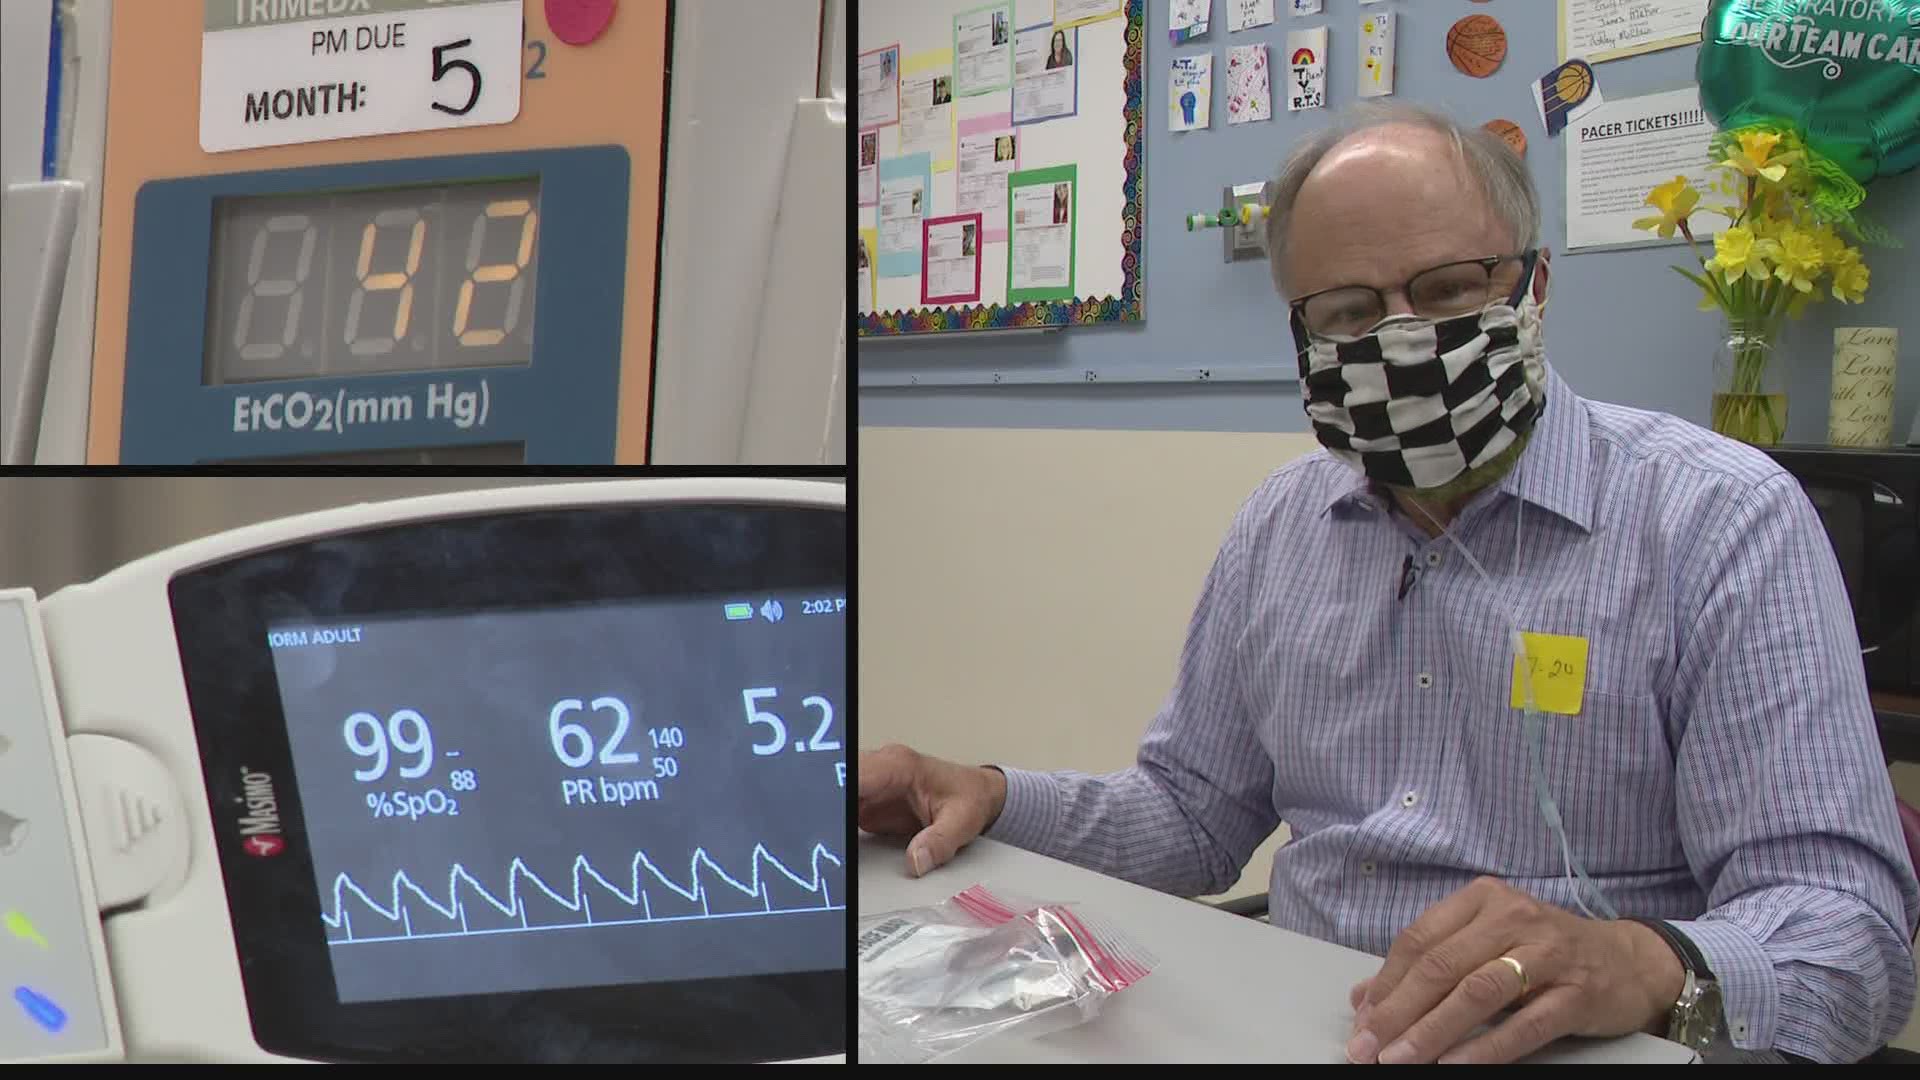 13News reporter Rich Van Wyk tested claims that wearing a mask reduces oxygen to your body.